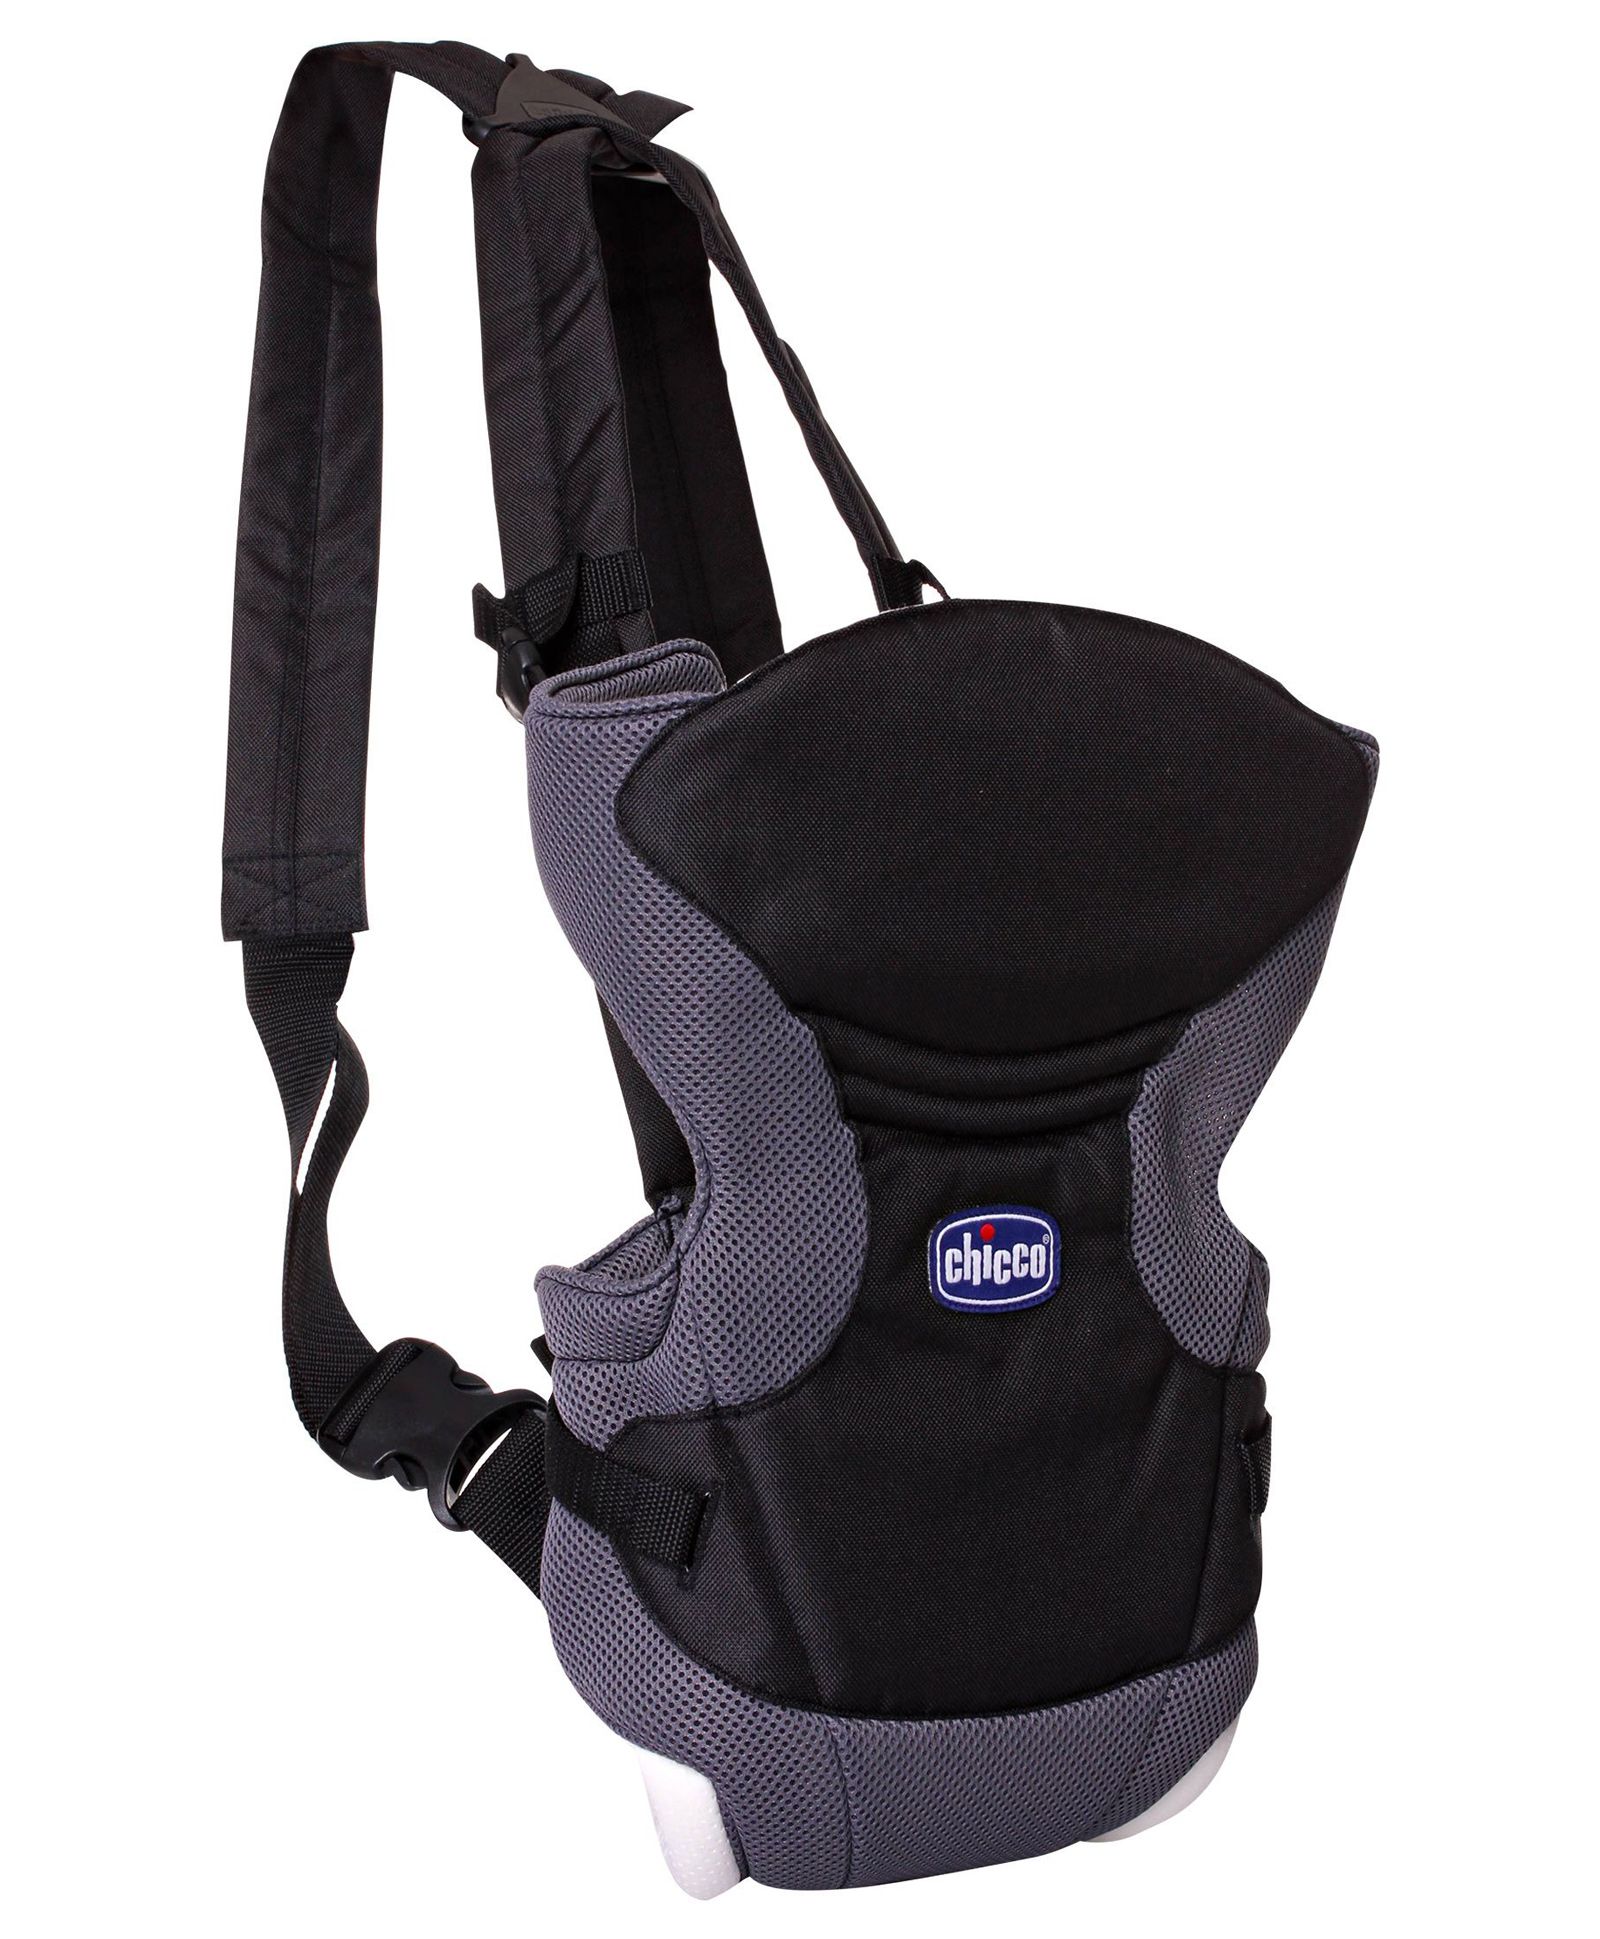 Chicco - Go Baby Carrier (Black)